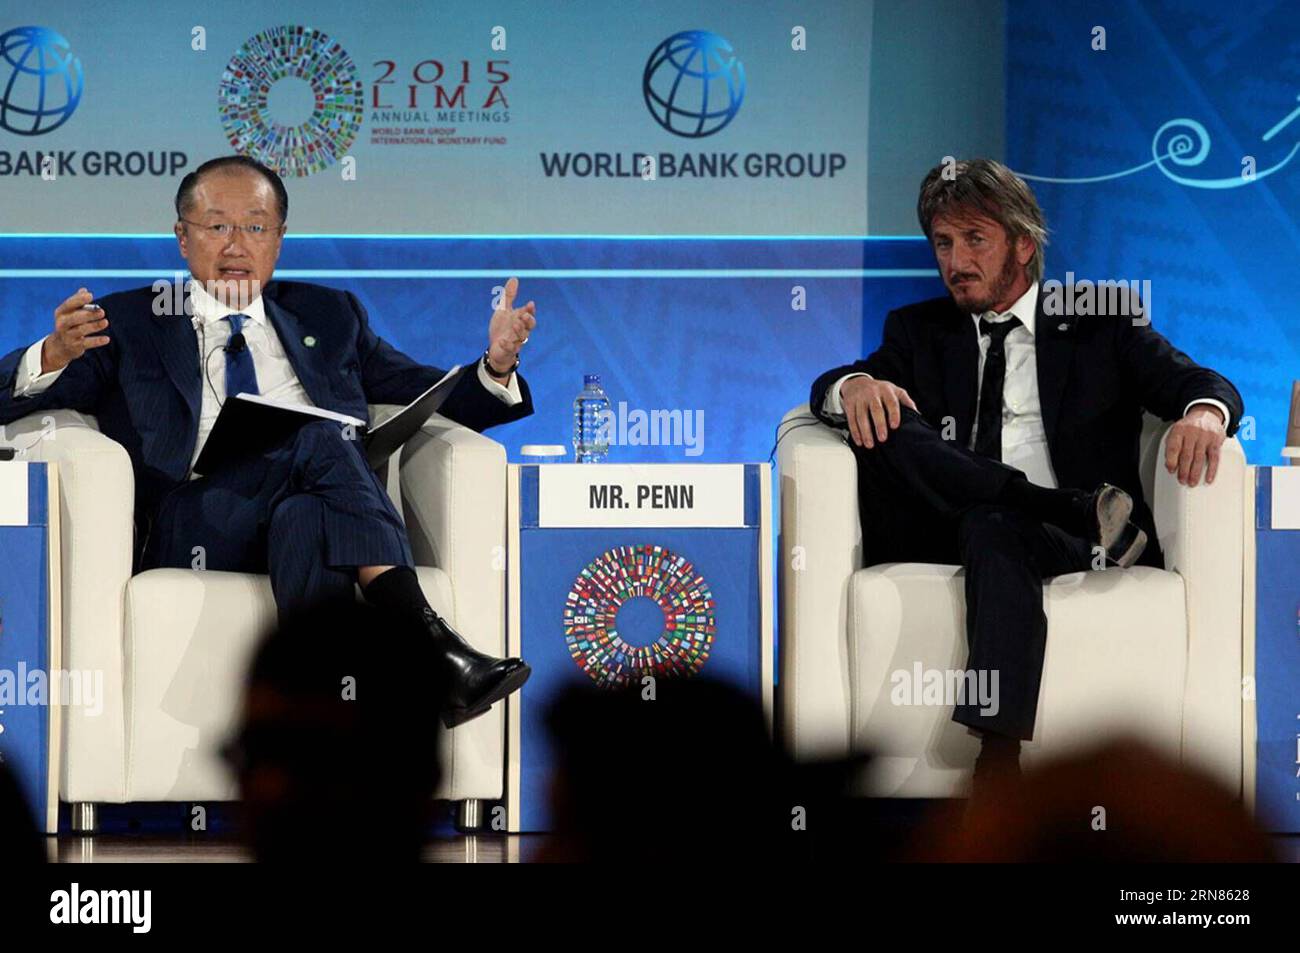 151008 -- LIMA, Oct. 8, 2015 -- Jim Yong Kim L, President of the World Bank WB, and U.S. actor and Founder of J/P Haitian Relief Organization Sean Penn take part in the seminar Young Entrepreneurs as Drivers of Sustainable Growth , at the Annual Meetings of the World Bank Group WBG and the International Monetary Fund IMF, in Lima, Peru, on Oct. 8, 2015. Carlos Guzman Negrini/ fnc sp PERU-LIMA-IMF-WB-ECONOMY-MEETINGS ANDINA PUBLICATIONxNOTxINxCHN Stock Photo